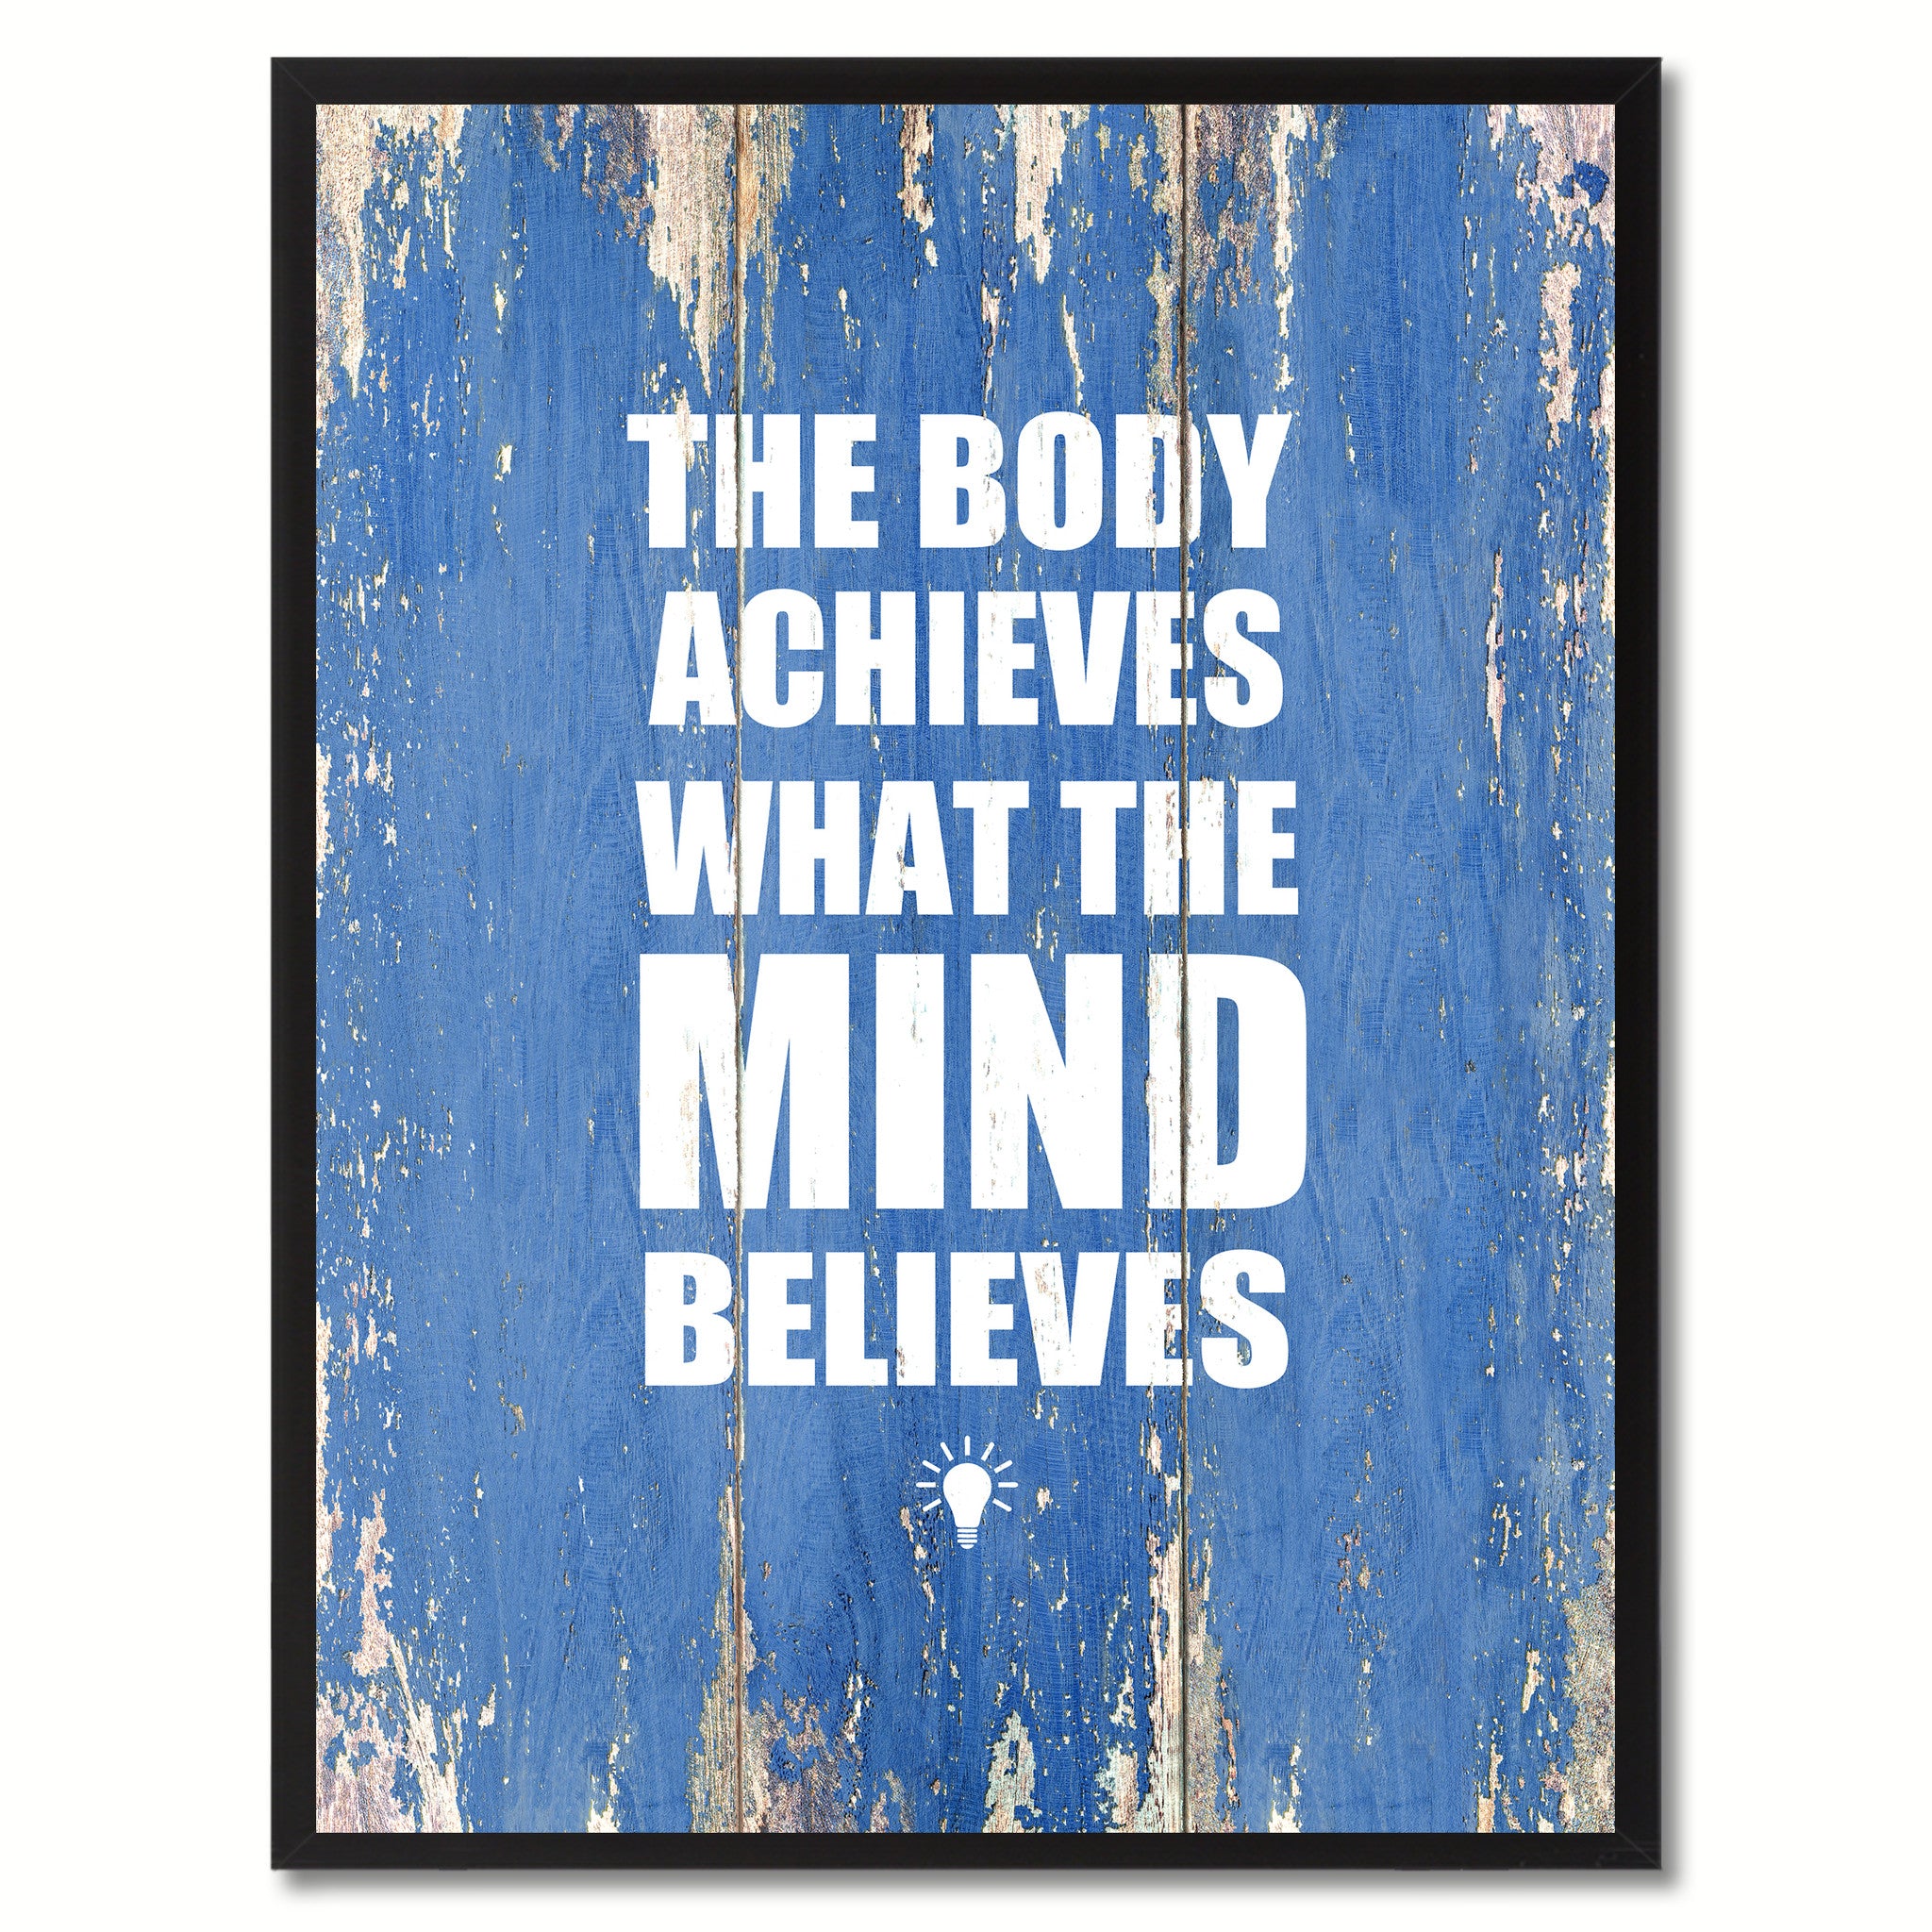 The Body Achieves What The Mind Believes Saying Canvas Print, Black Picture Frame Home Decor Wall Art Gifts